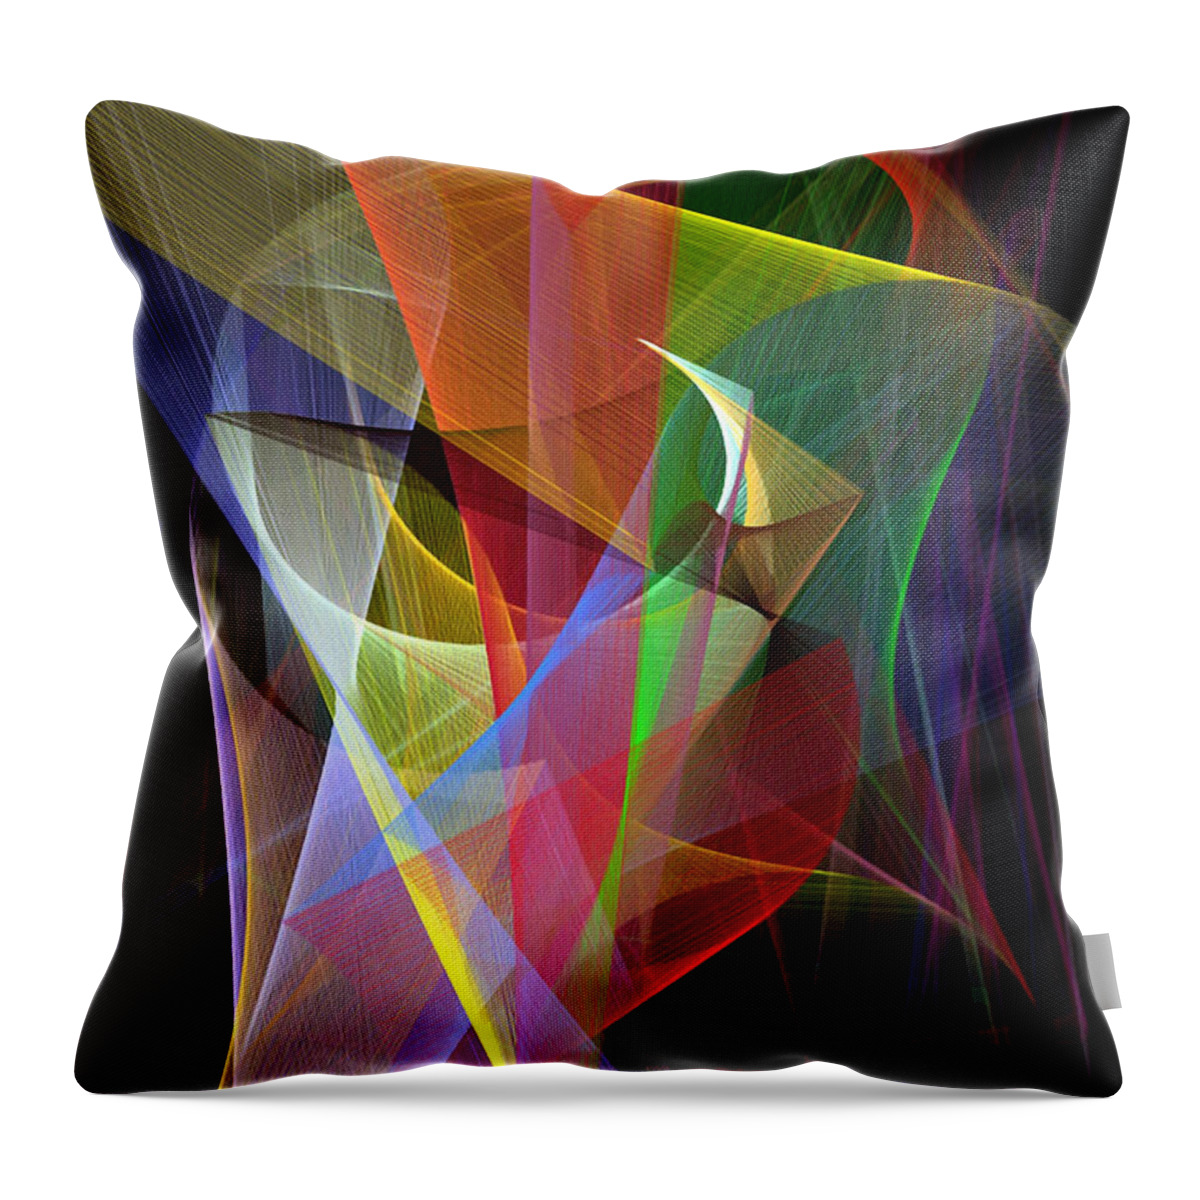 Abstract Throw Pillow featuring the digital art Color Symphony by Rafael Salazar